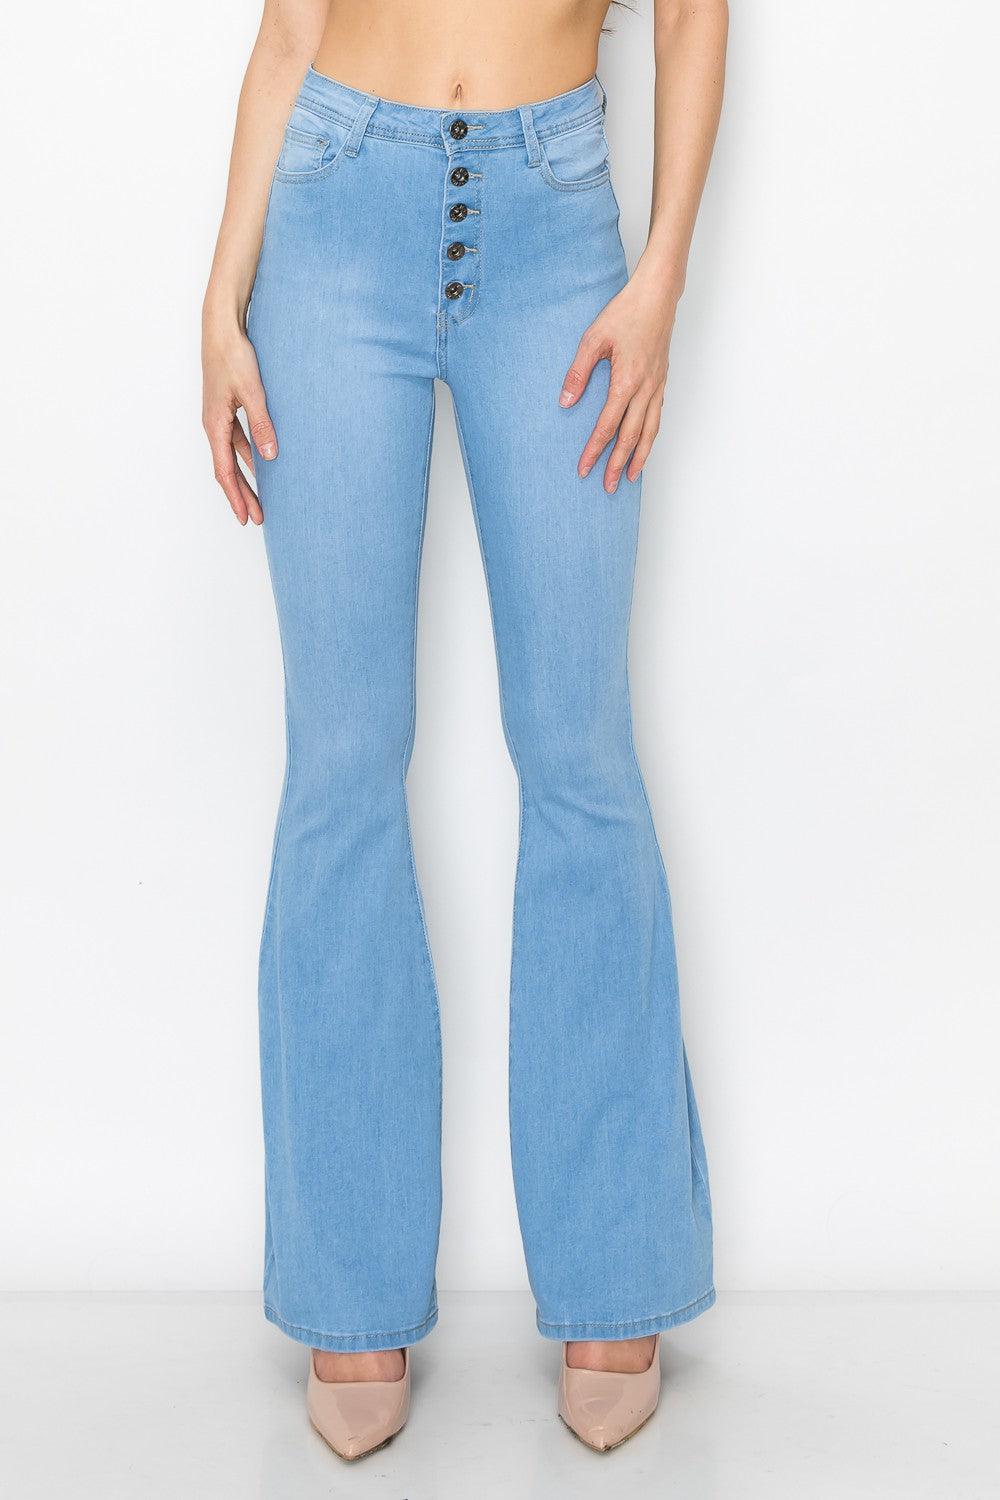 Bc-065 High Waist Button Flare Jeans - RK Collections Boutique